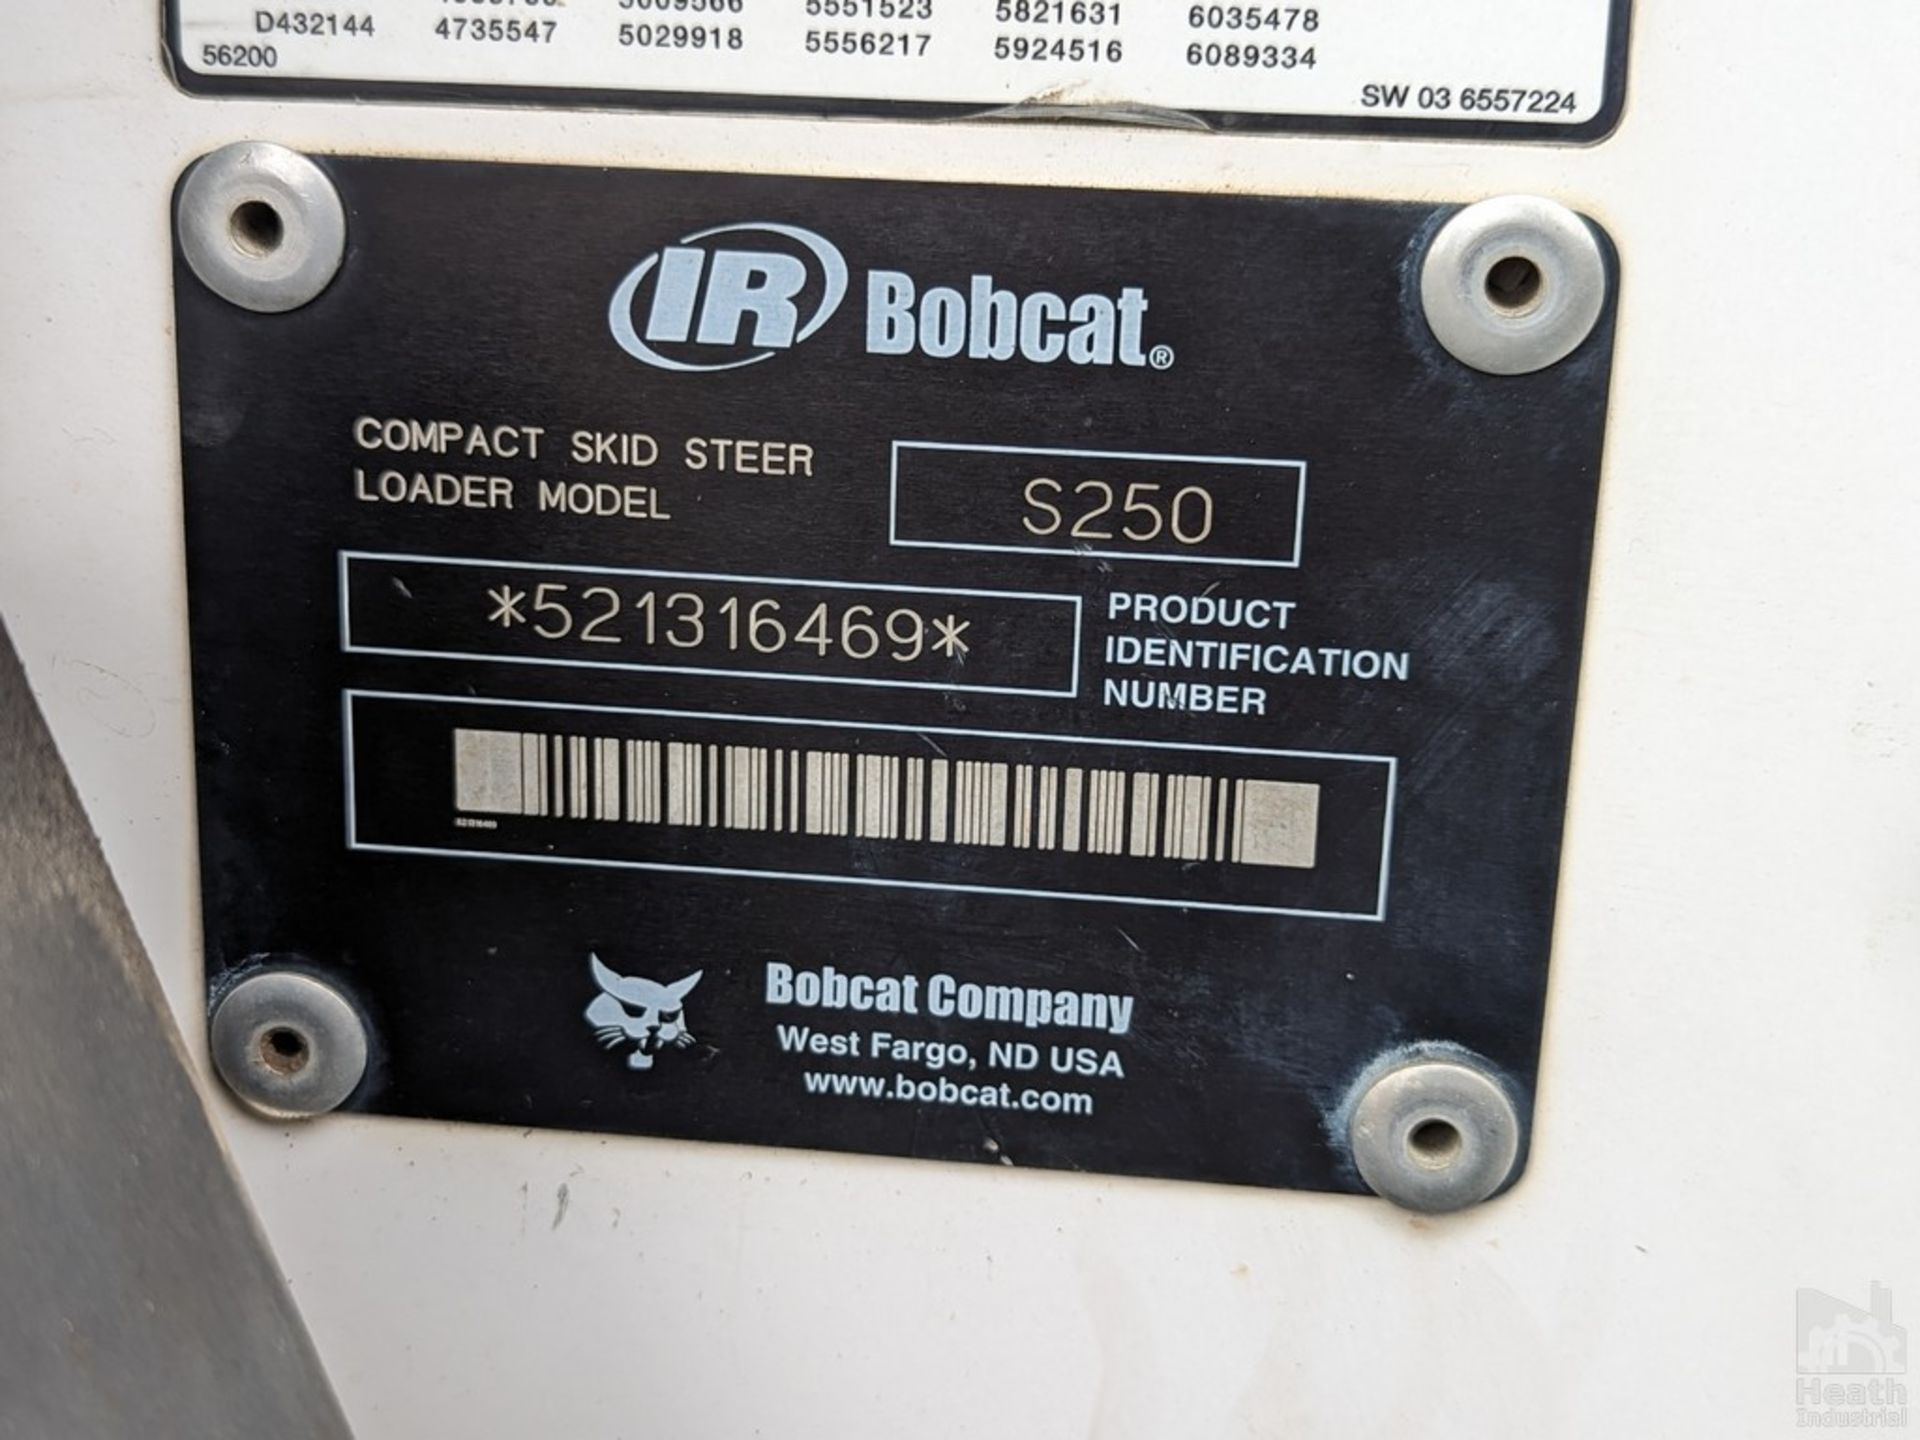 BOBCAT MODEL S250 SKID STEER LOADER, PIN 521316469, AUX HYDRAULICS, 2353 HOURS SHOWN ON METER - Image 10 of 10